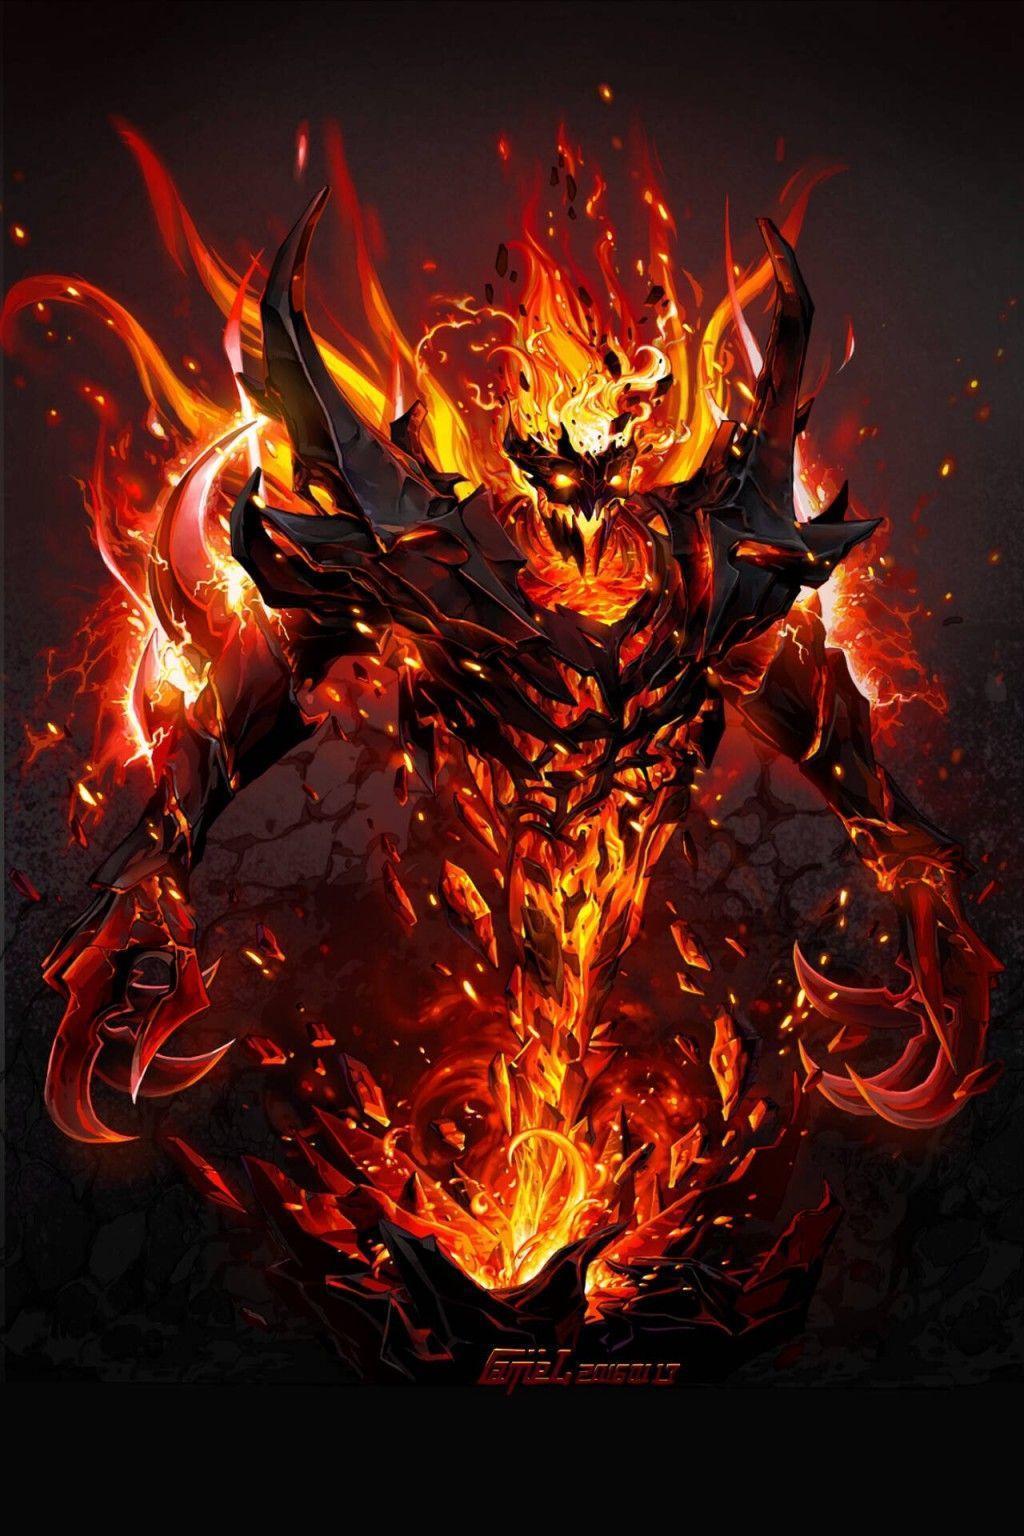 Shadow Fiend Wallpapers Wallpaper Cave